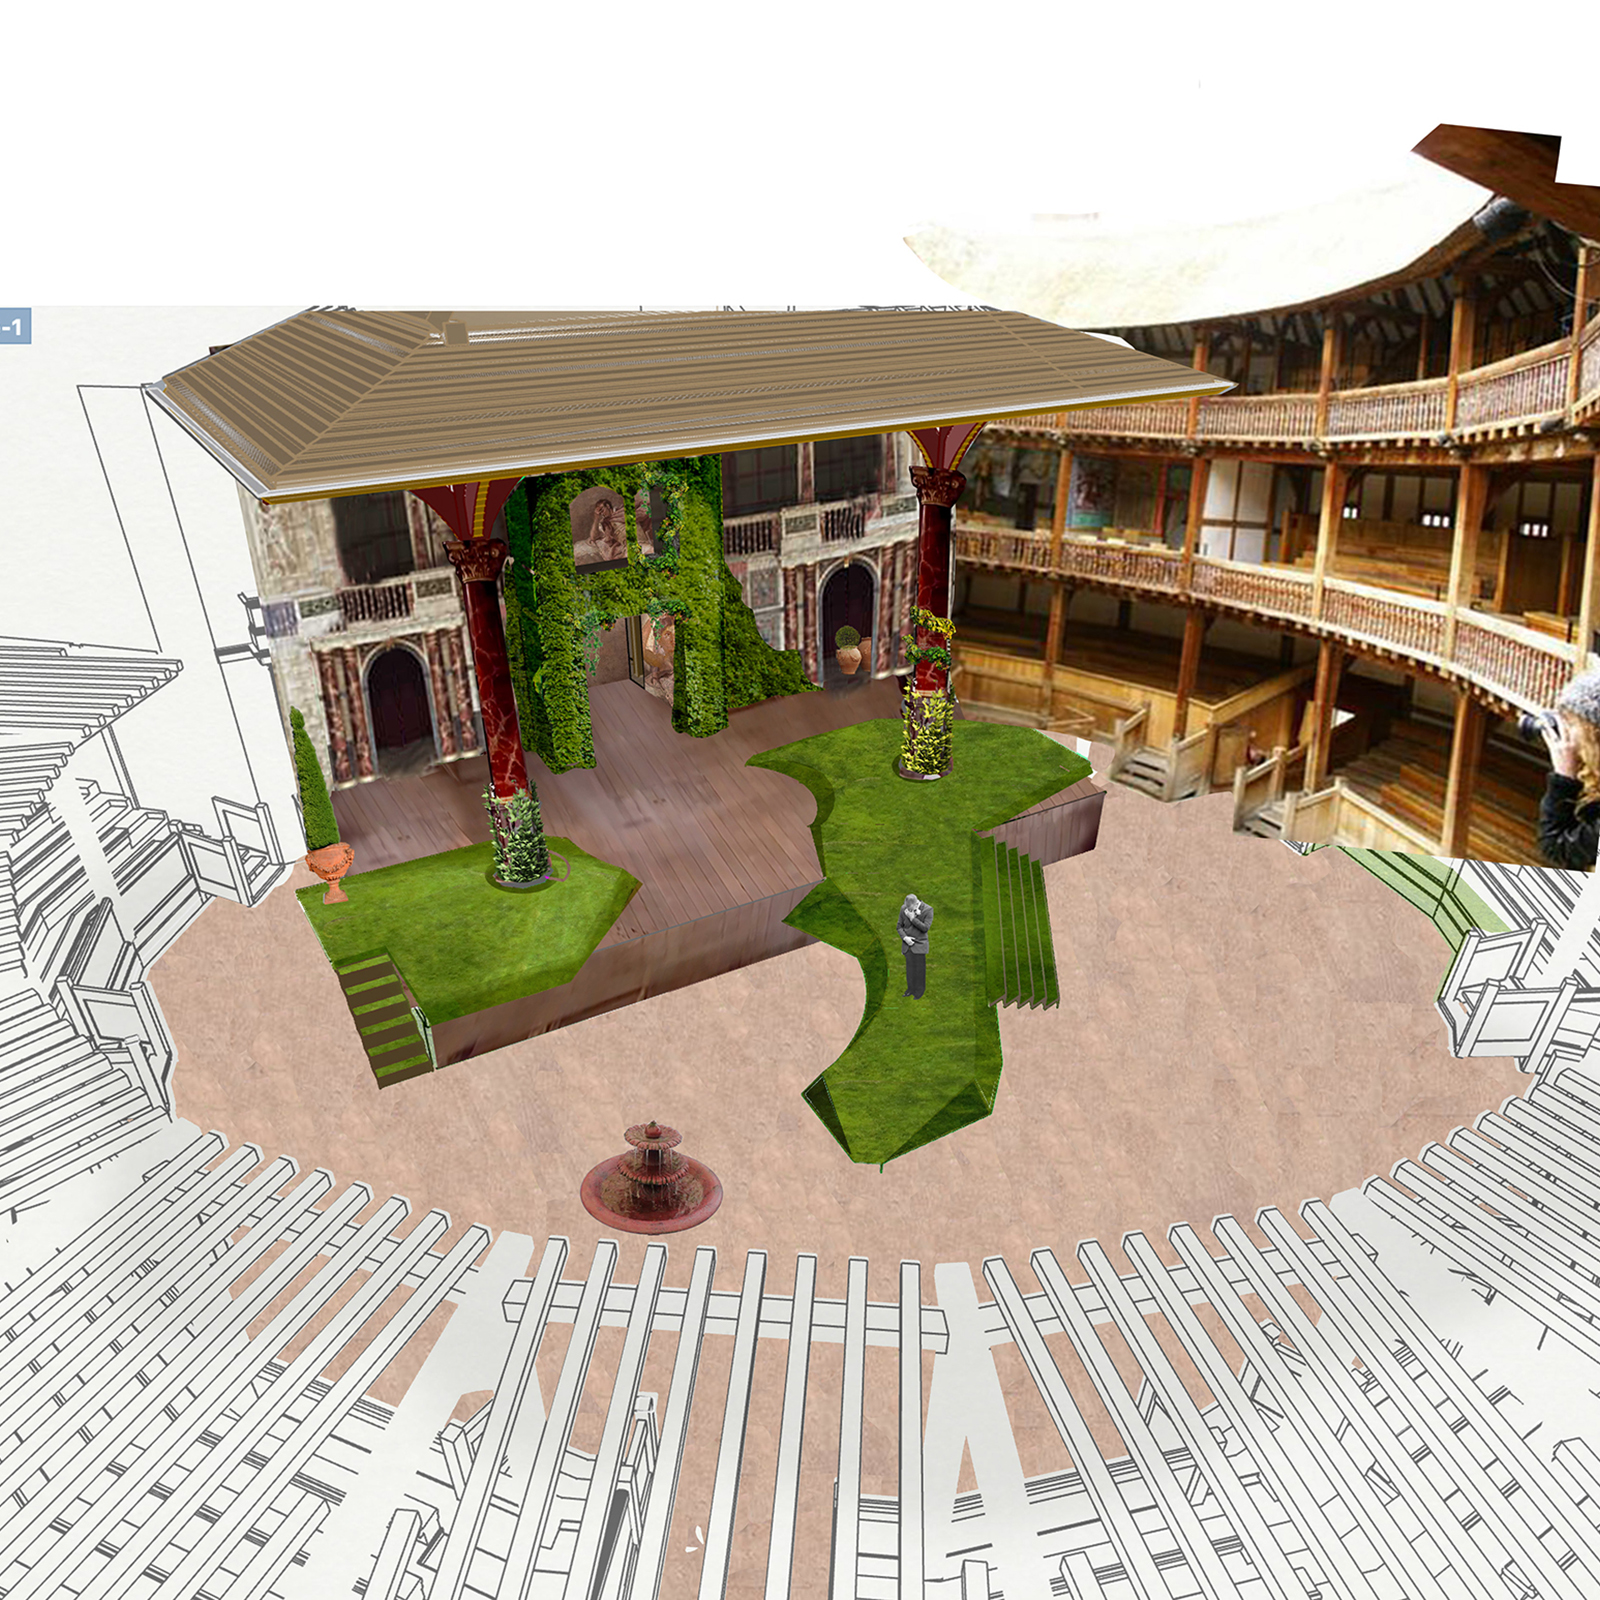 A sketch of the Globe Theatre space showcasing it's natural wooden design blended with the garden design for Much Ado About Nothing. A grassy lawn covers the stage and extends out into the Yard. A water fountain is positioned in the Yard.